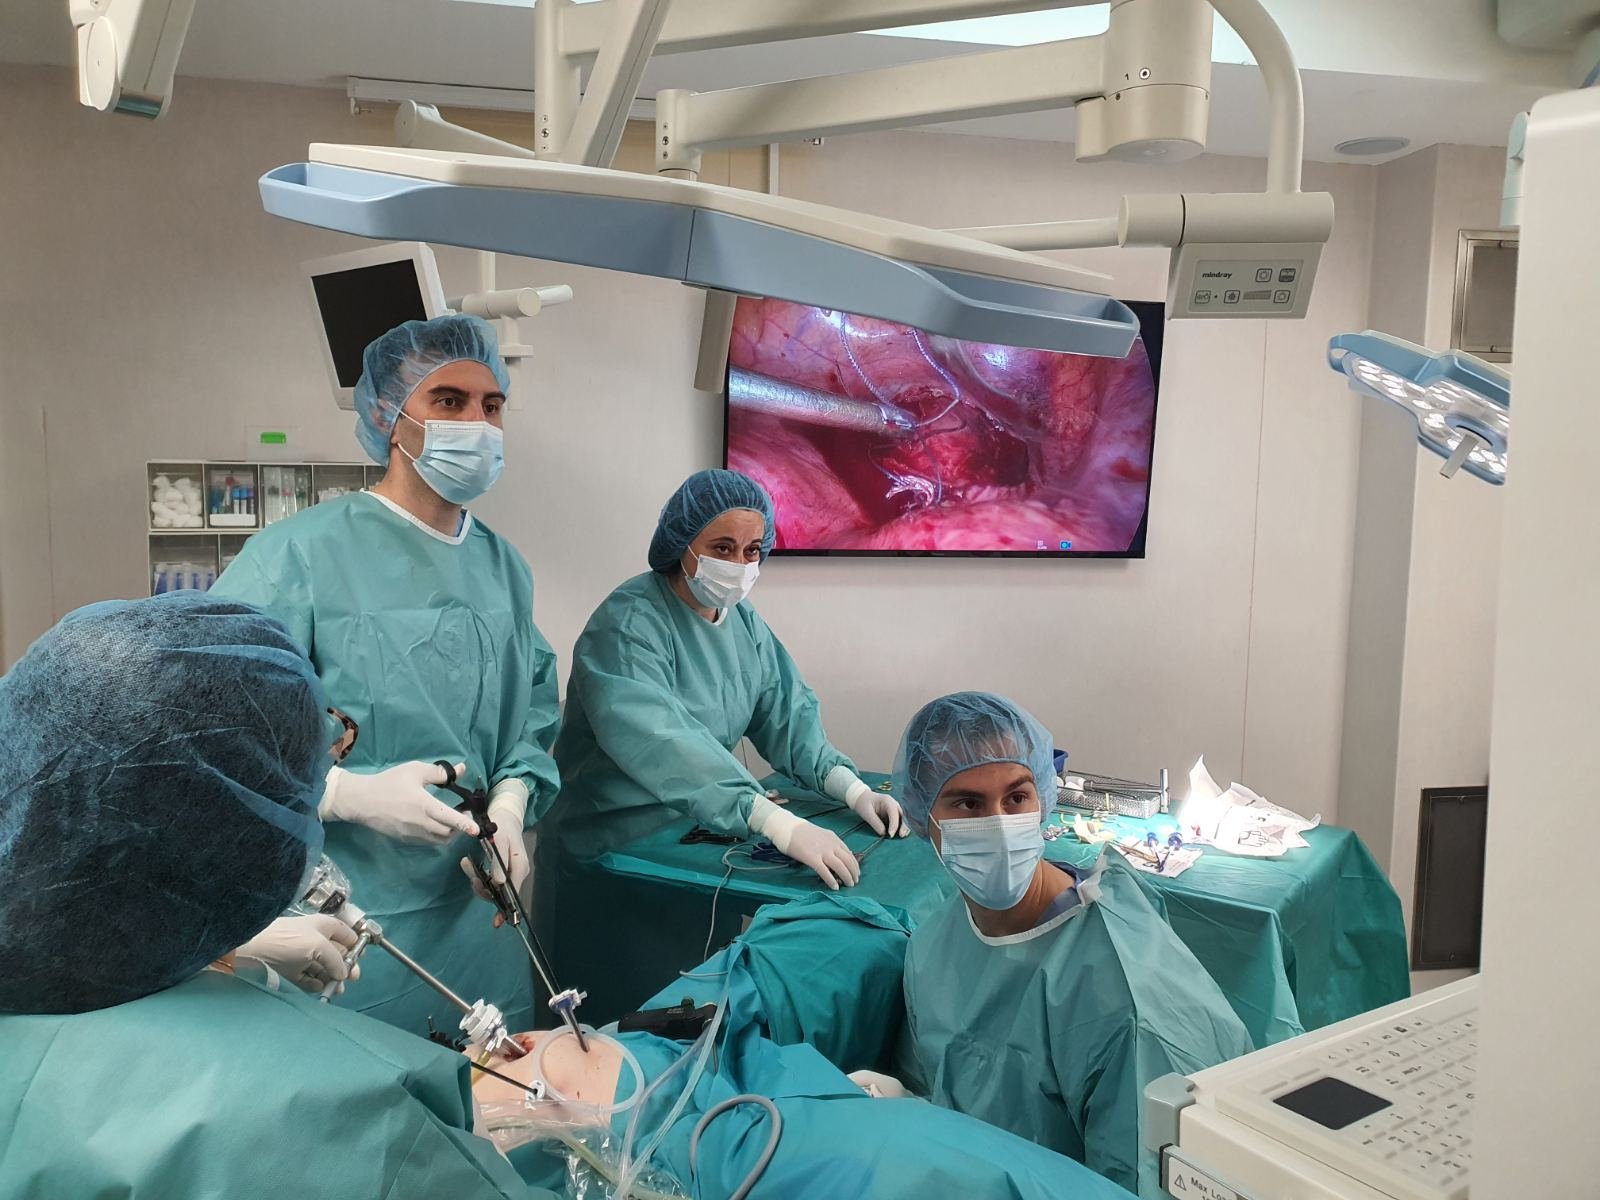 RISE OF THE ENDOSCOPIC SURGERY AT HOSPITAL PLODNOST” class=”wplp_thumb” /></span></a><a href=